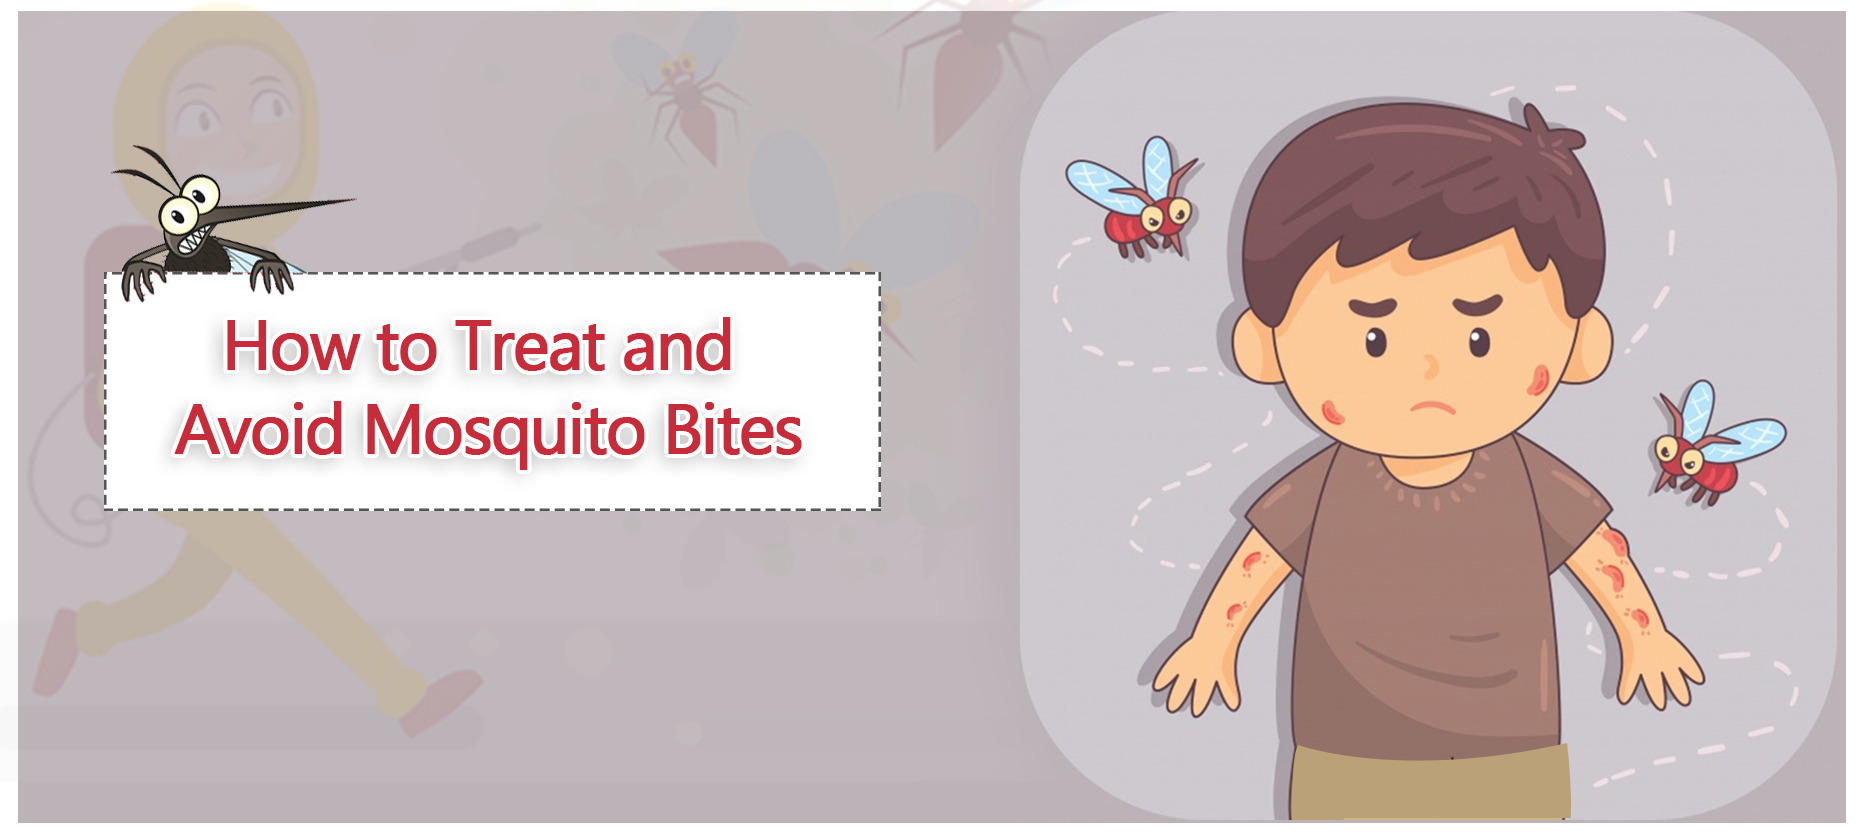 How to treat and avoid mosquito bites